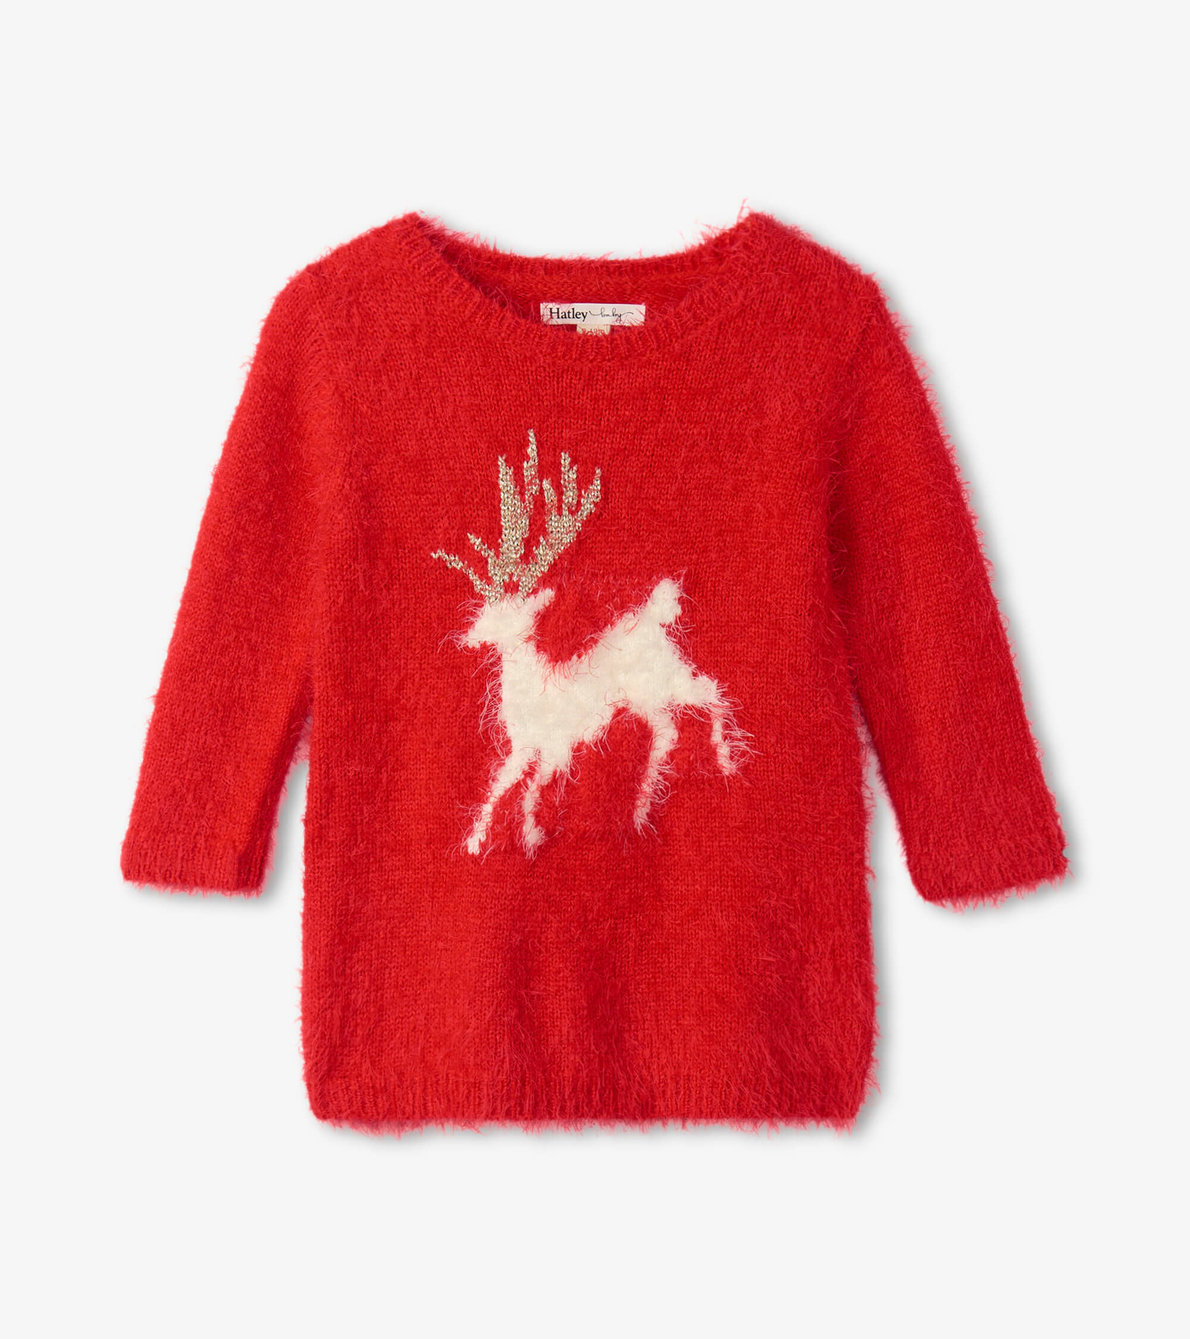 View larger image of Holideer Fuzzy Baby Sweater Dress